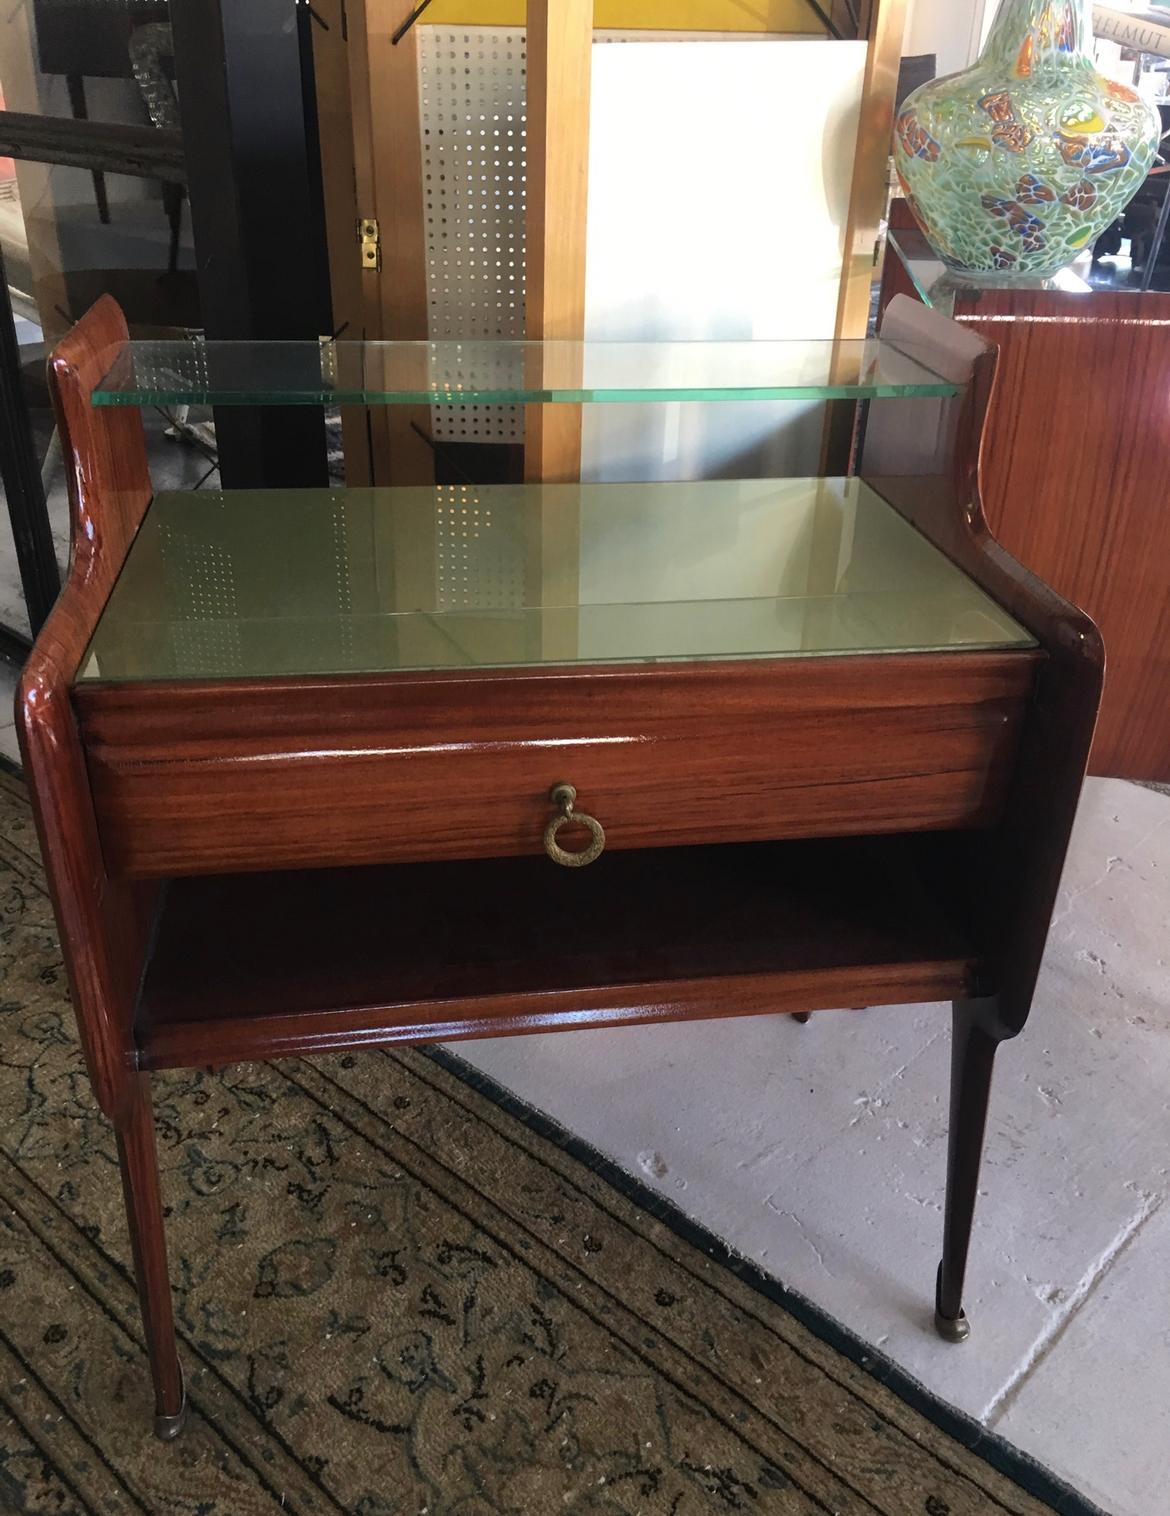 Pair of side tables or nightstands in wood and green glass, both in great condition. American, 1940s.